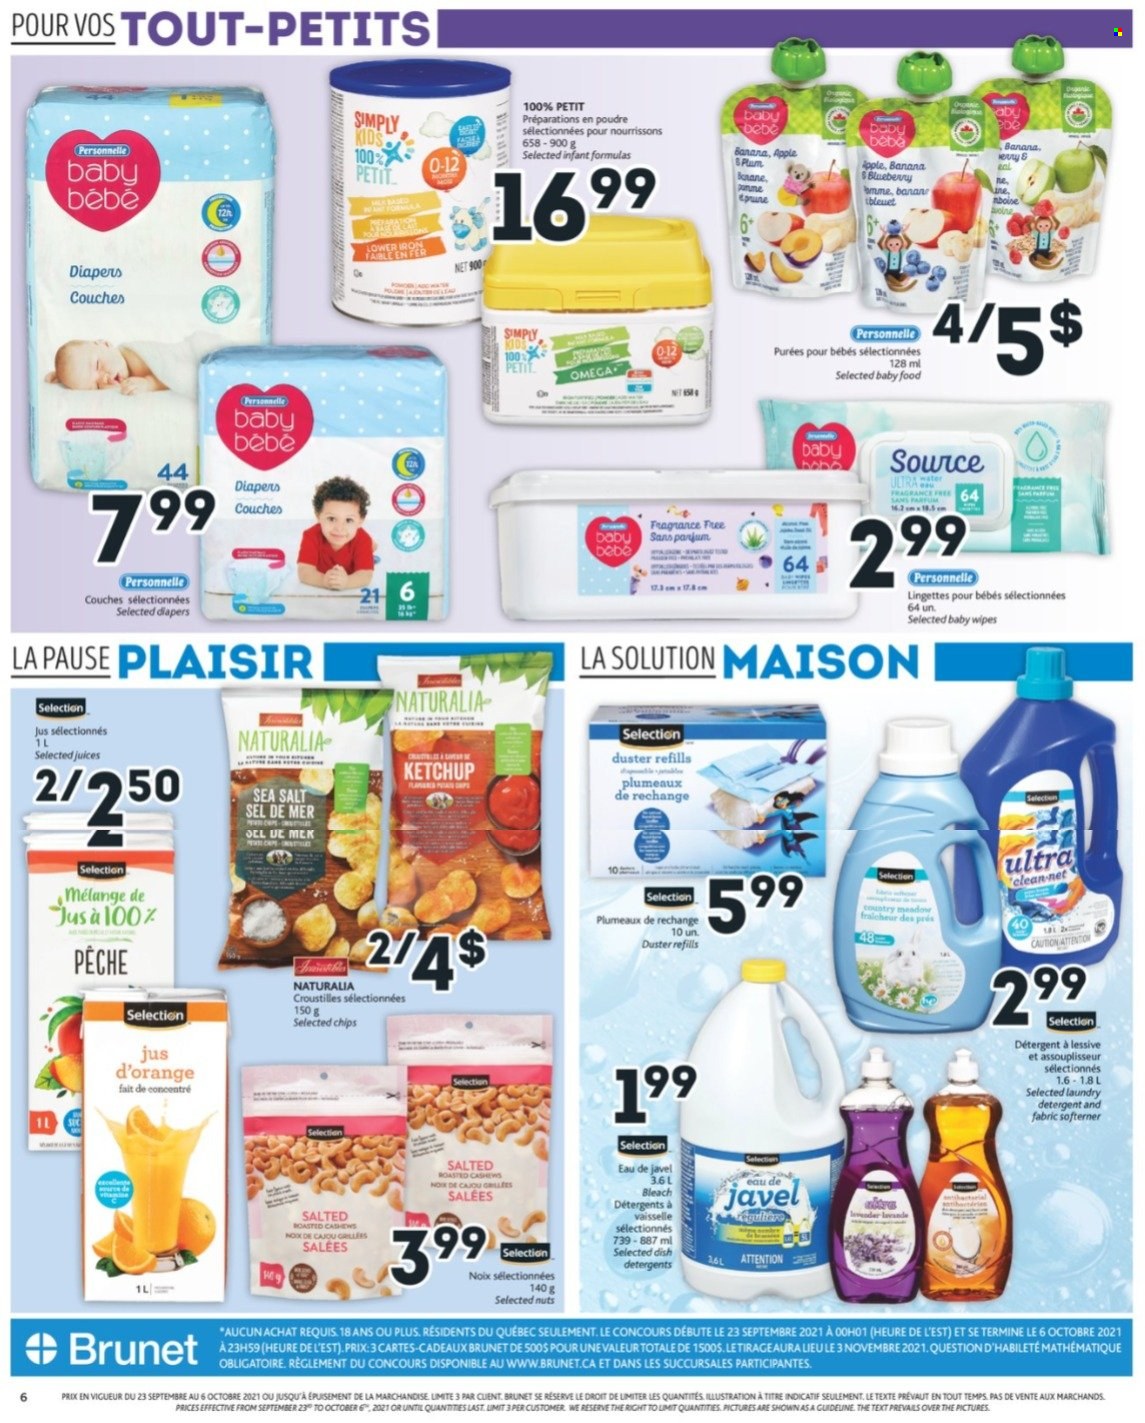 thumbnail - Brunet Flyer - September 23, 2021 - October 06, 2021 - Sales products - wipes, baby wipes, nappies, bleach, laundry detergent, detergent. Page 6.